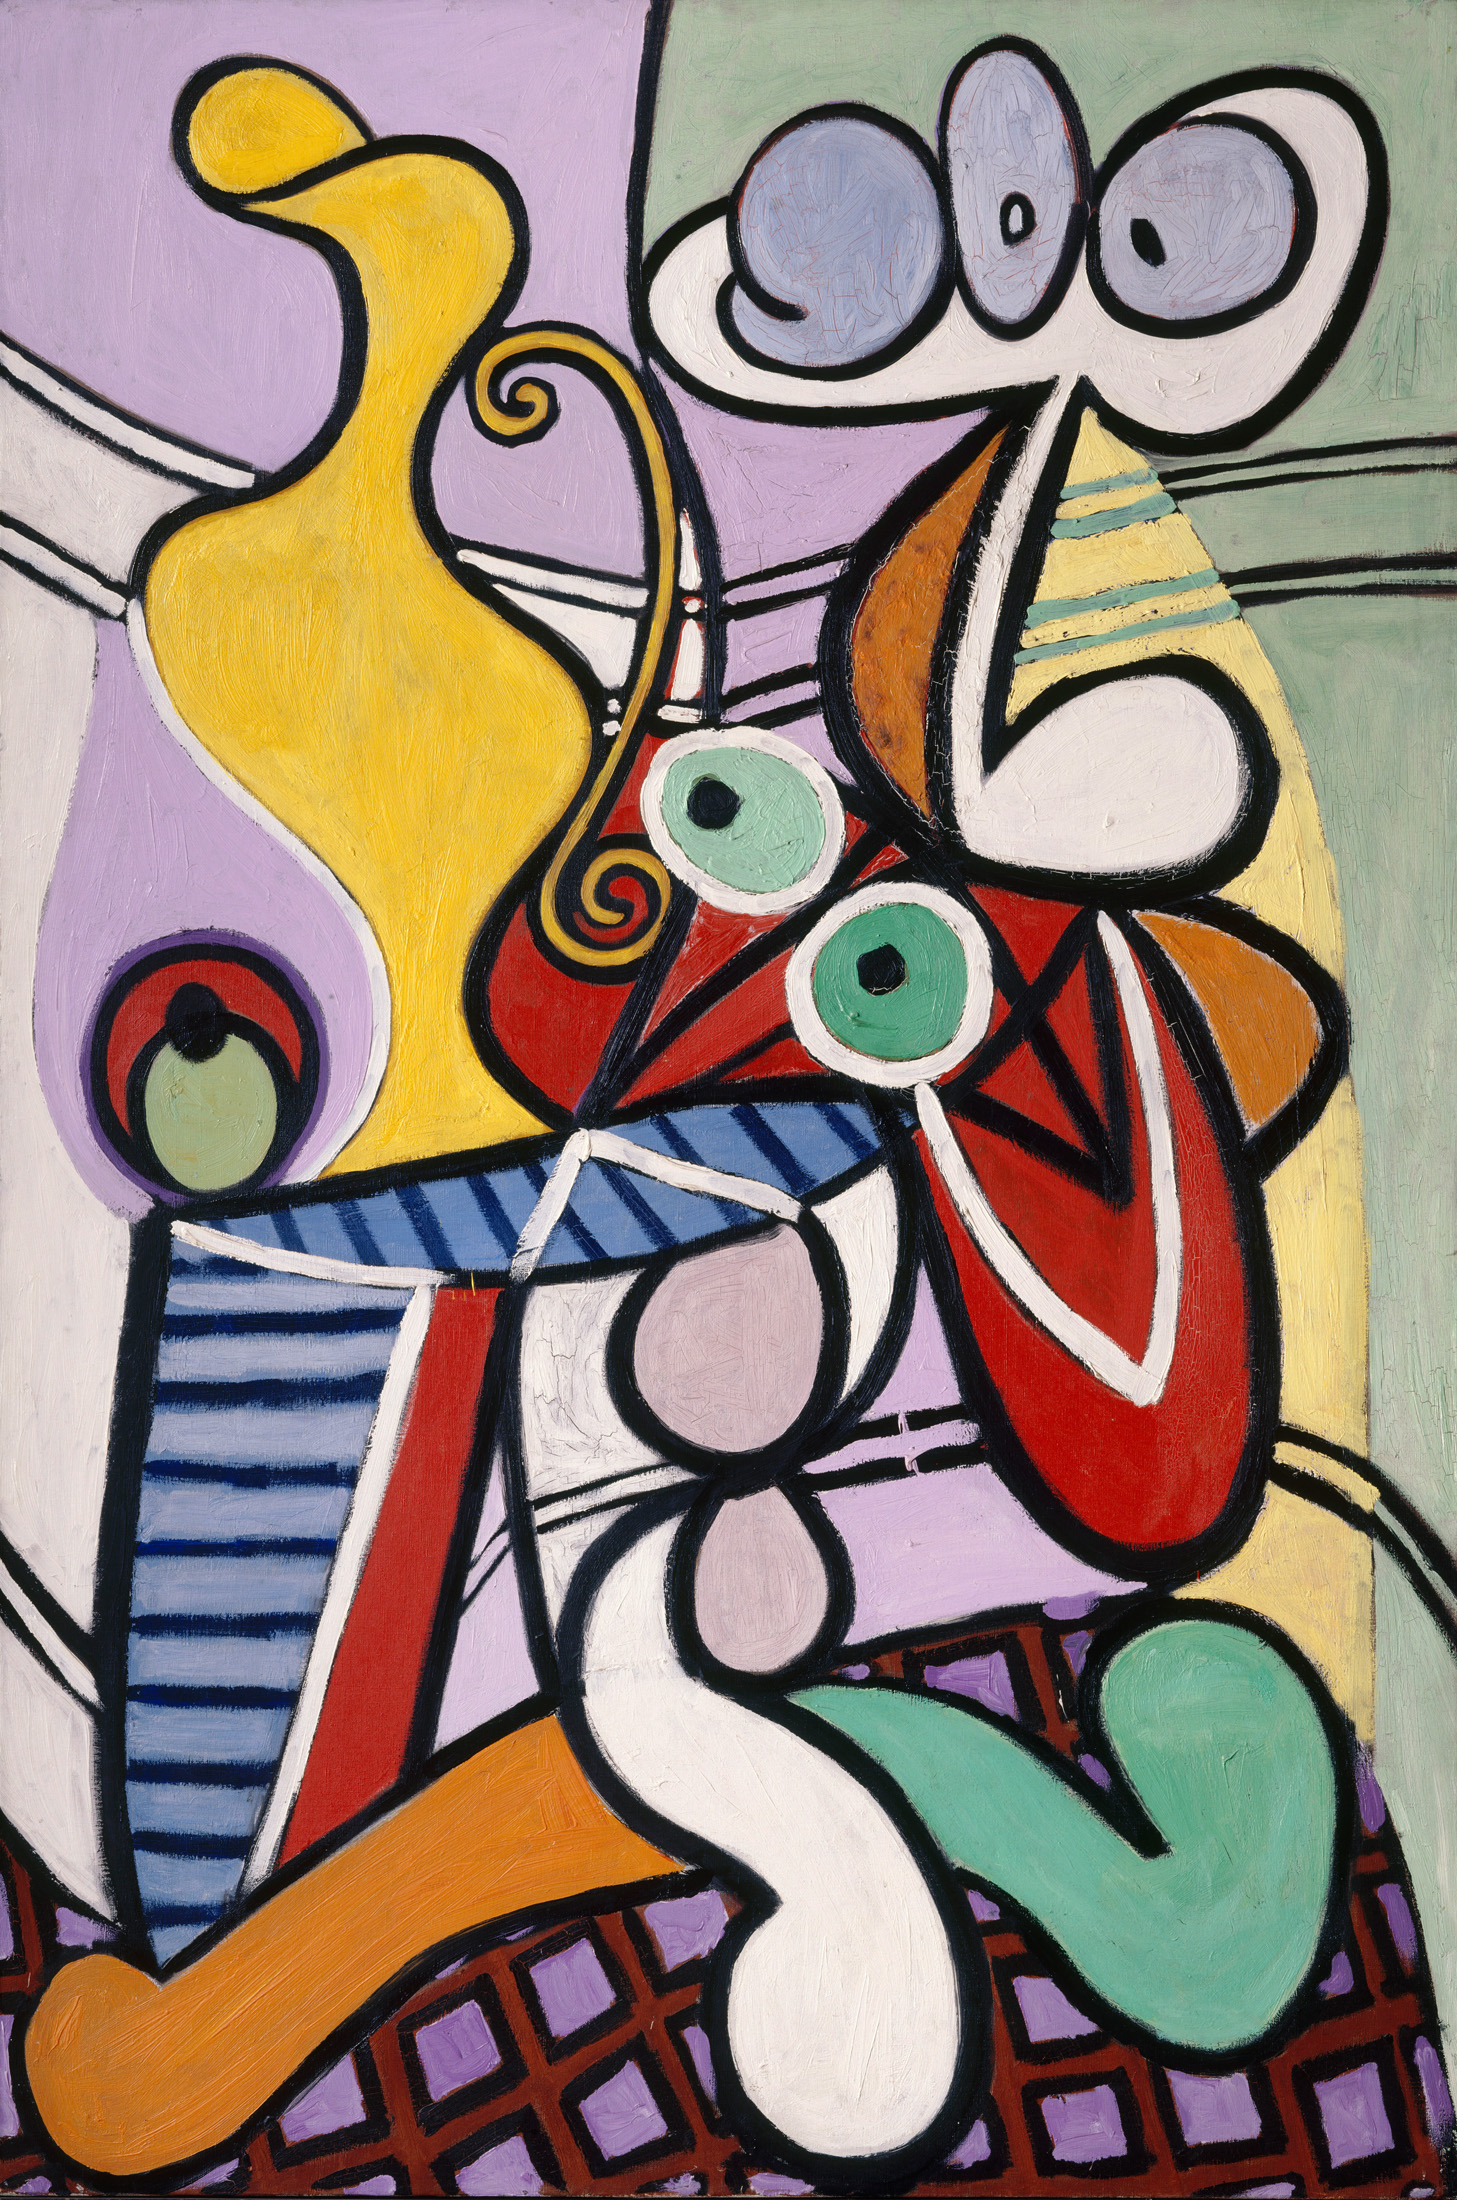 From Africa to the Americas, Picasso, Montreal Art